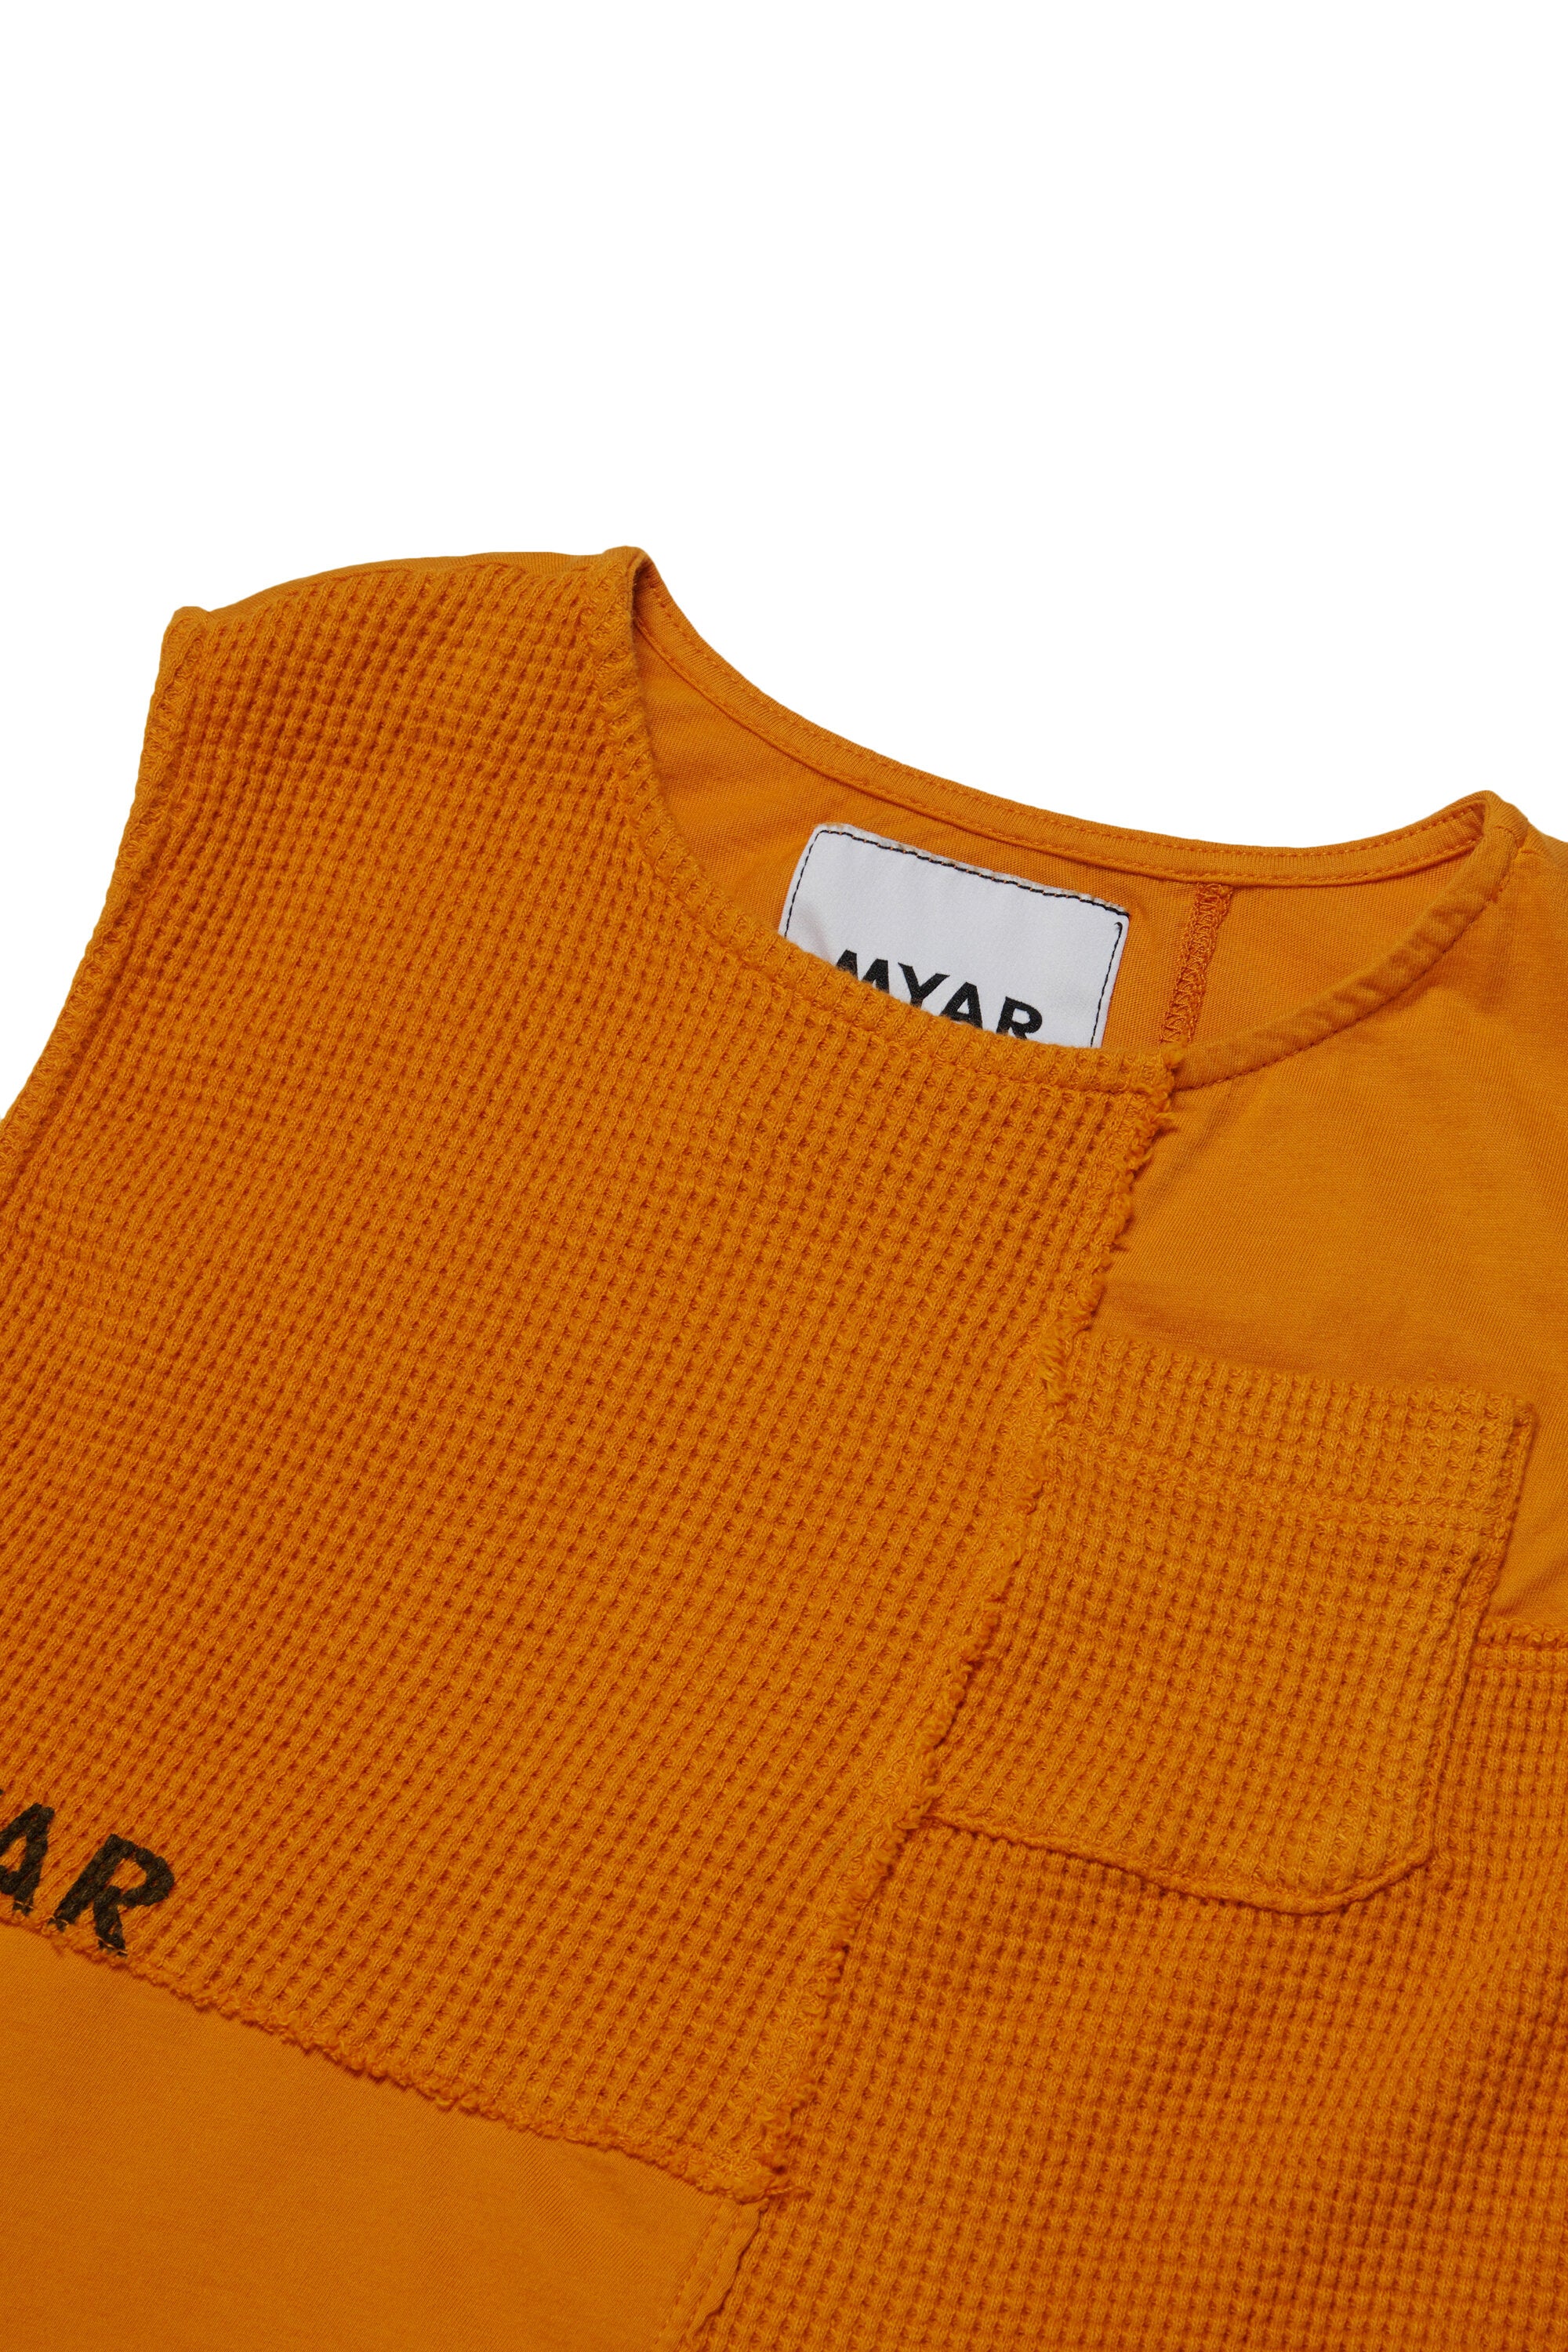 Deadstock fabric tank top with MYAR logo